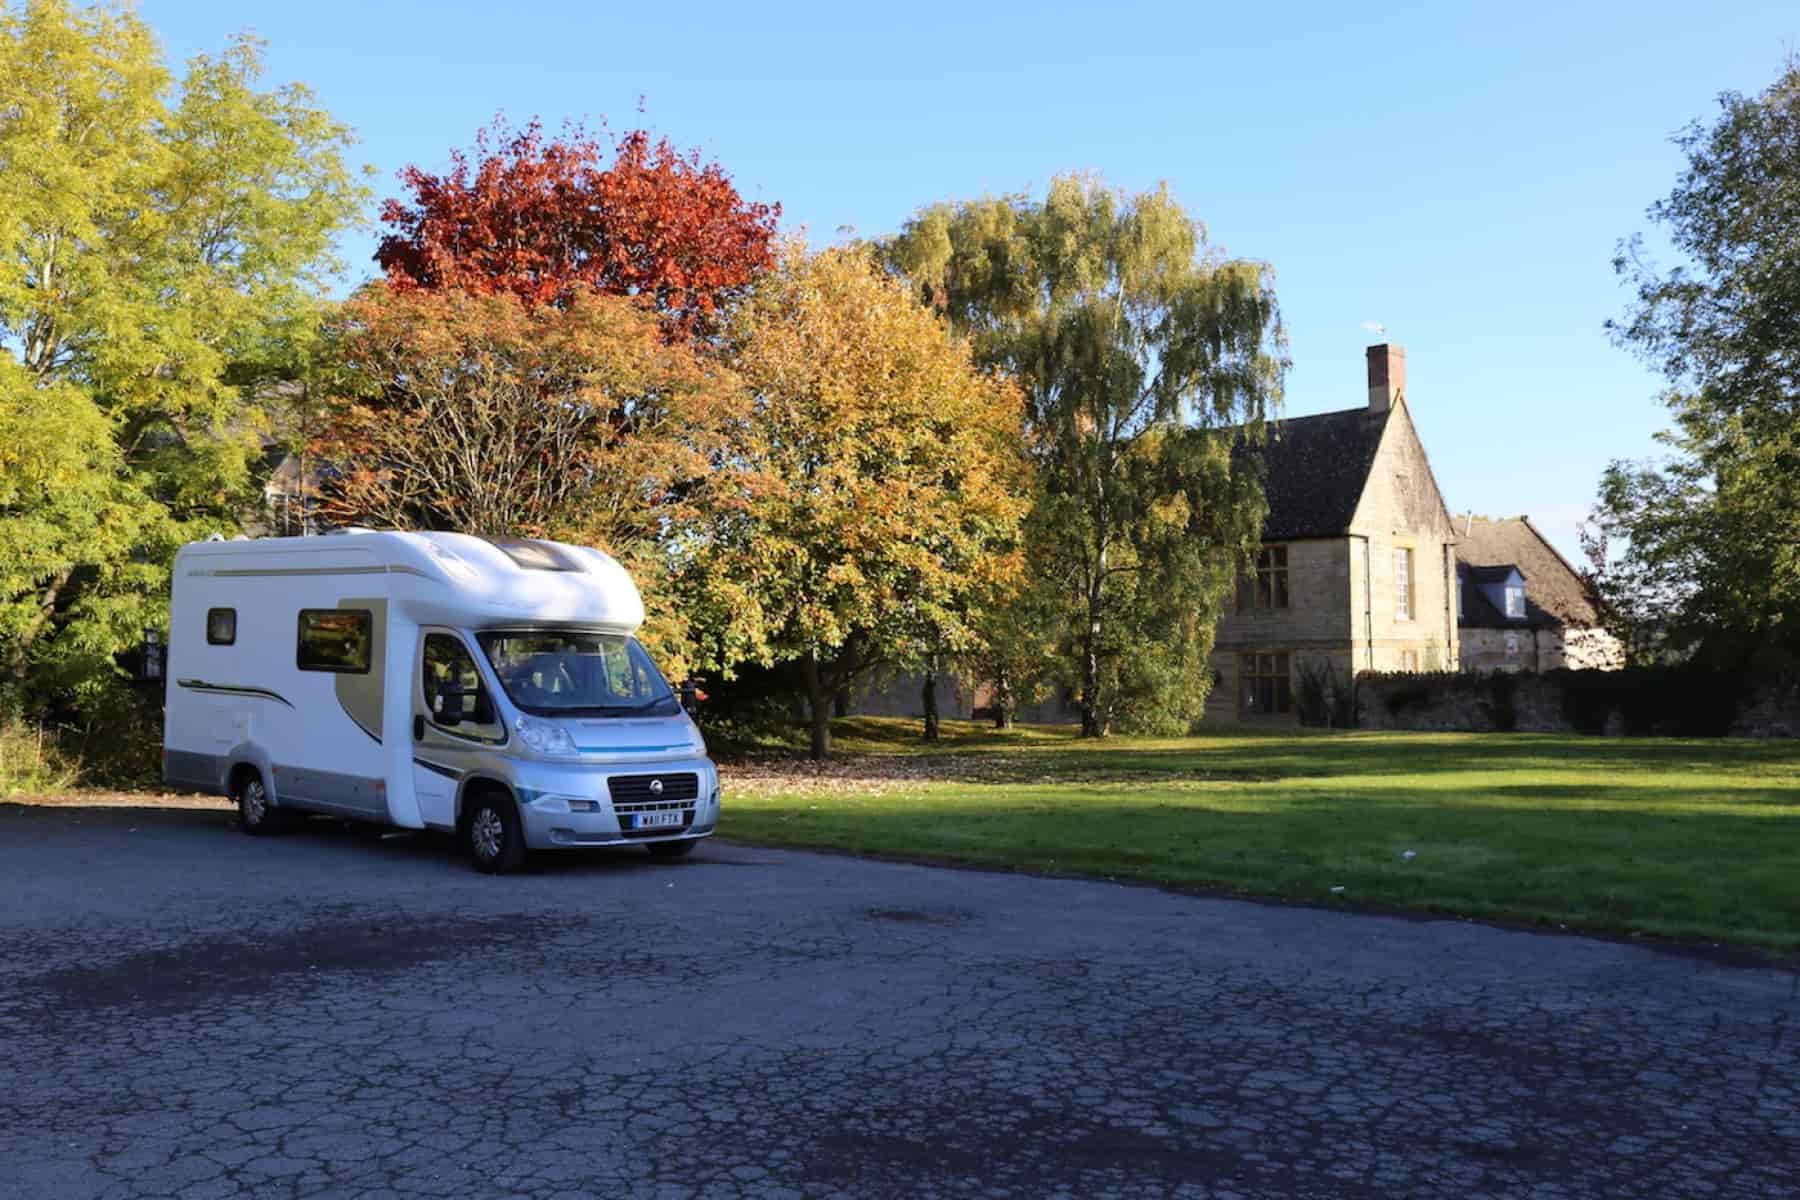 Get pub stopovers motorhomes made simple